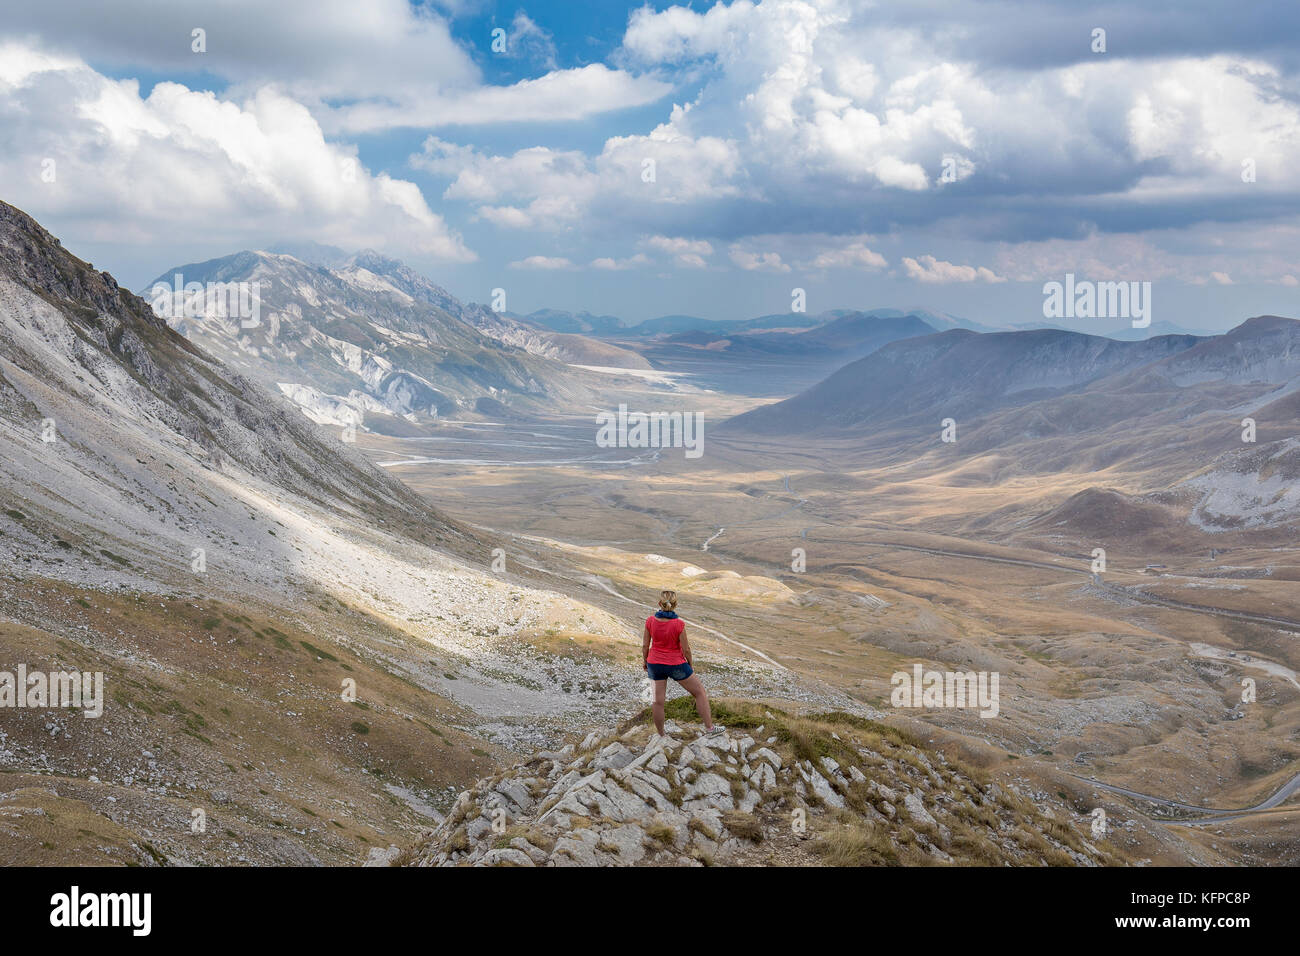 Woman staying at rock and watching power of nature at mountains of Gran Sasso National Park, Abruzzo, Italy Stock Photo